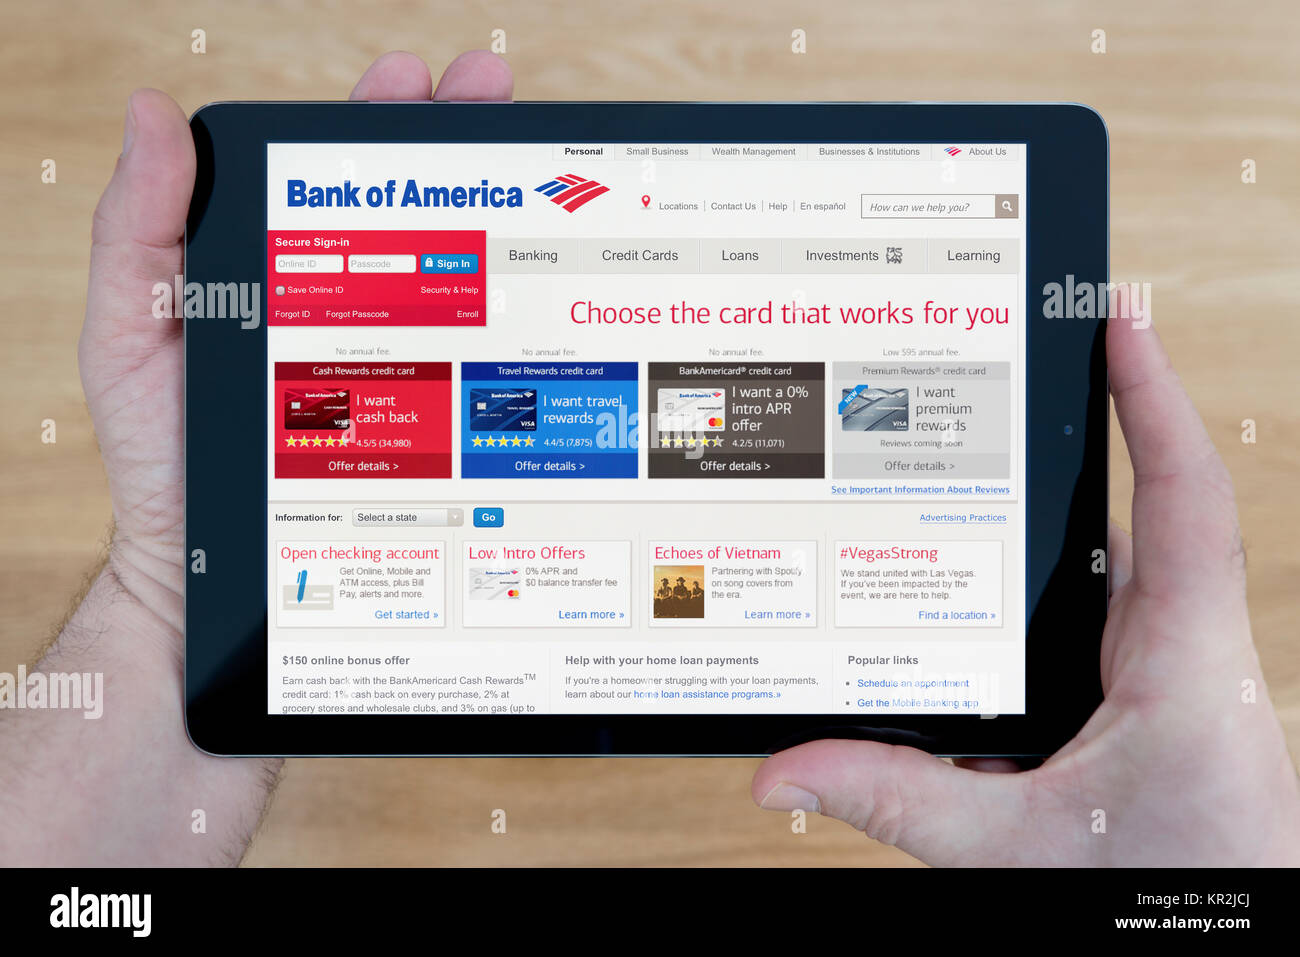 A man looks at the Bank of America website on his iPad tablet device, shot against a wooden table top background (Editorial use only) Stock Photo